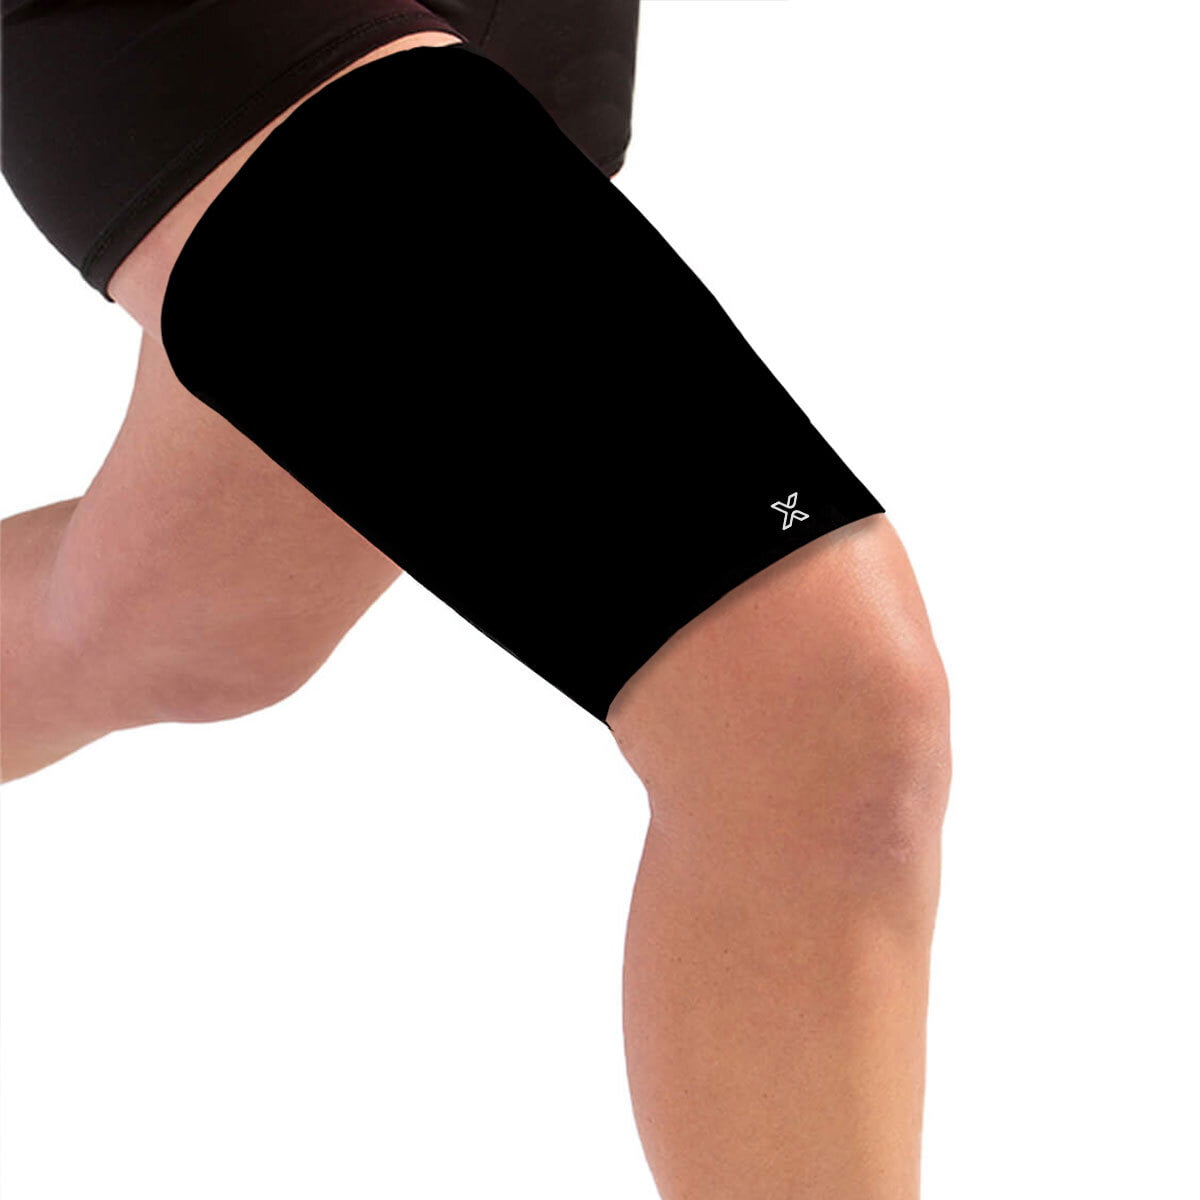 Upper Leg Thigh Brace Support Hamstring Compression Sleeve Pain